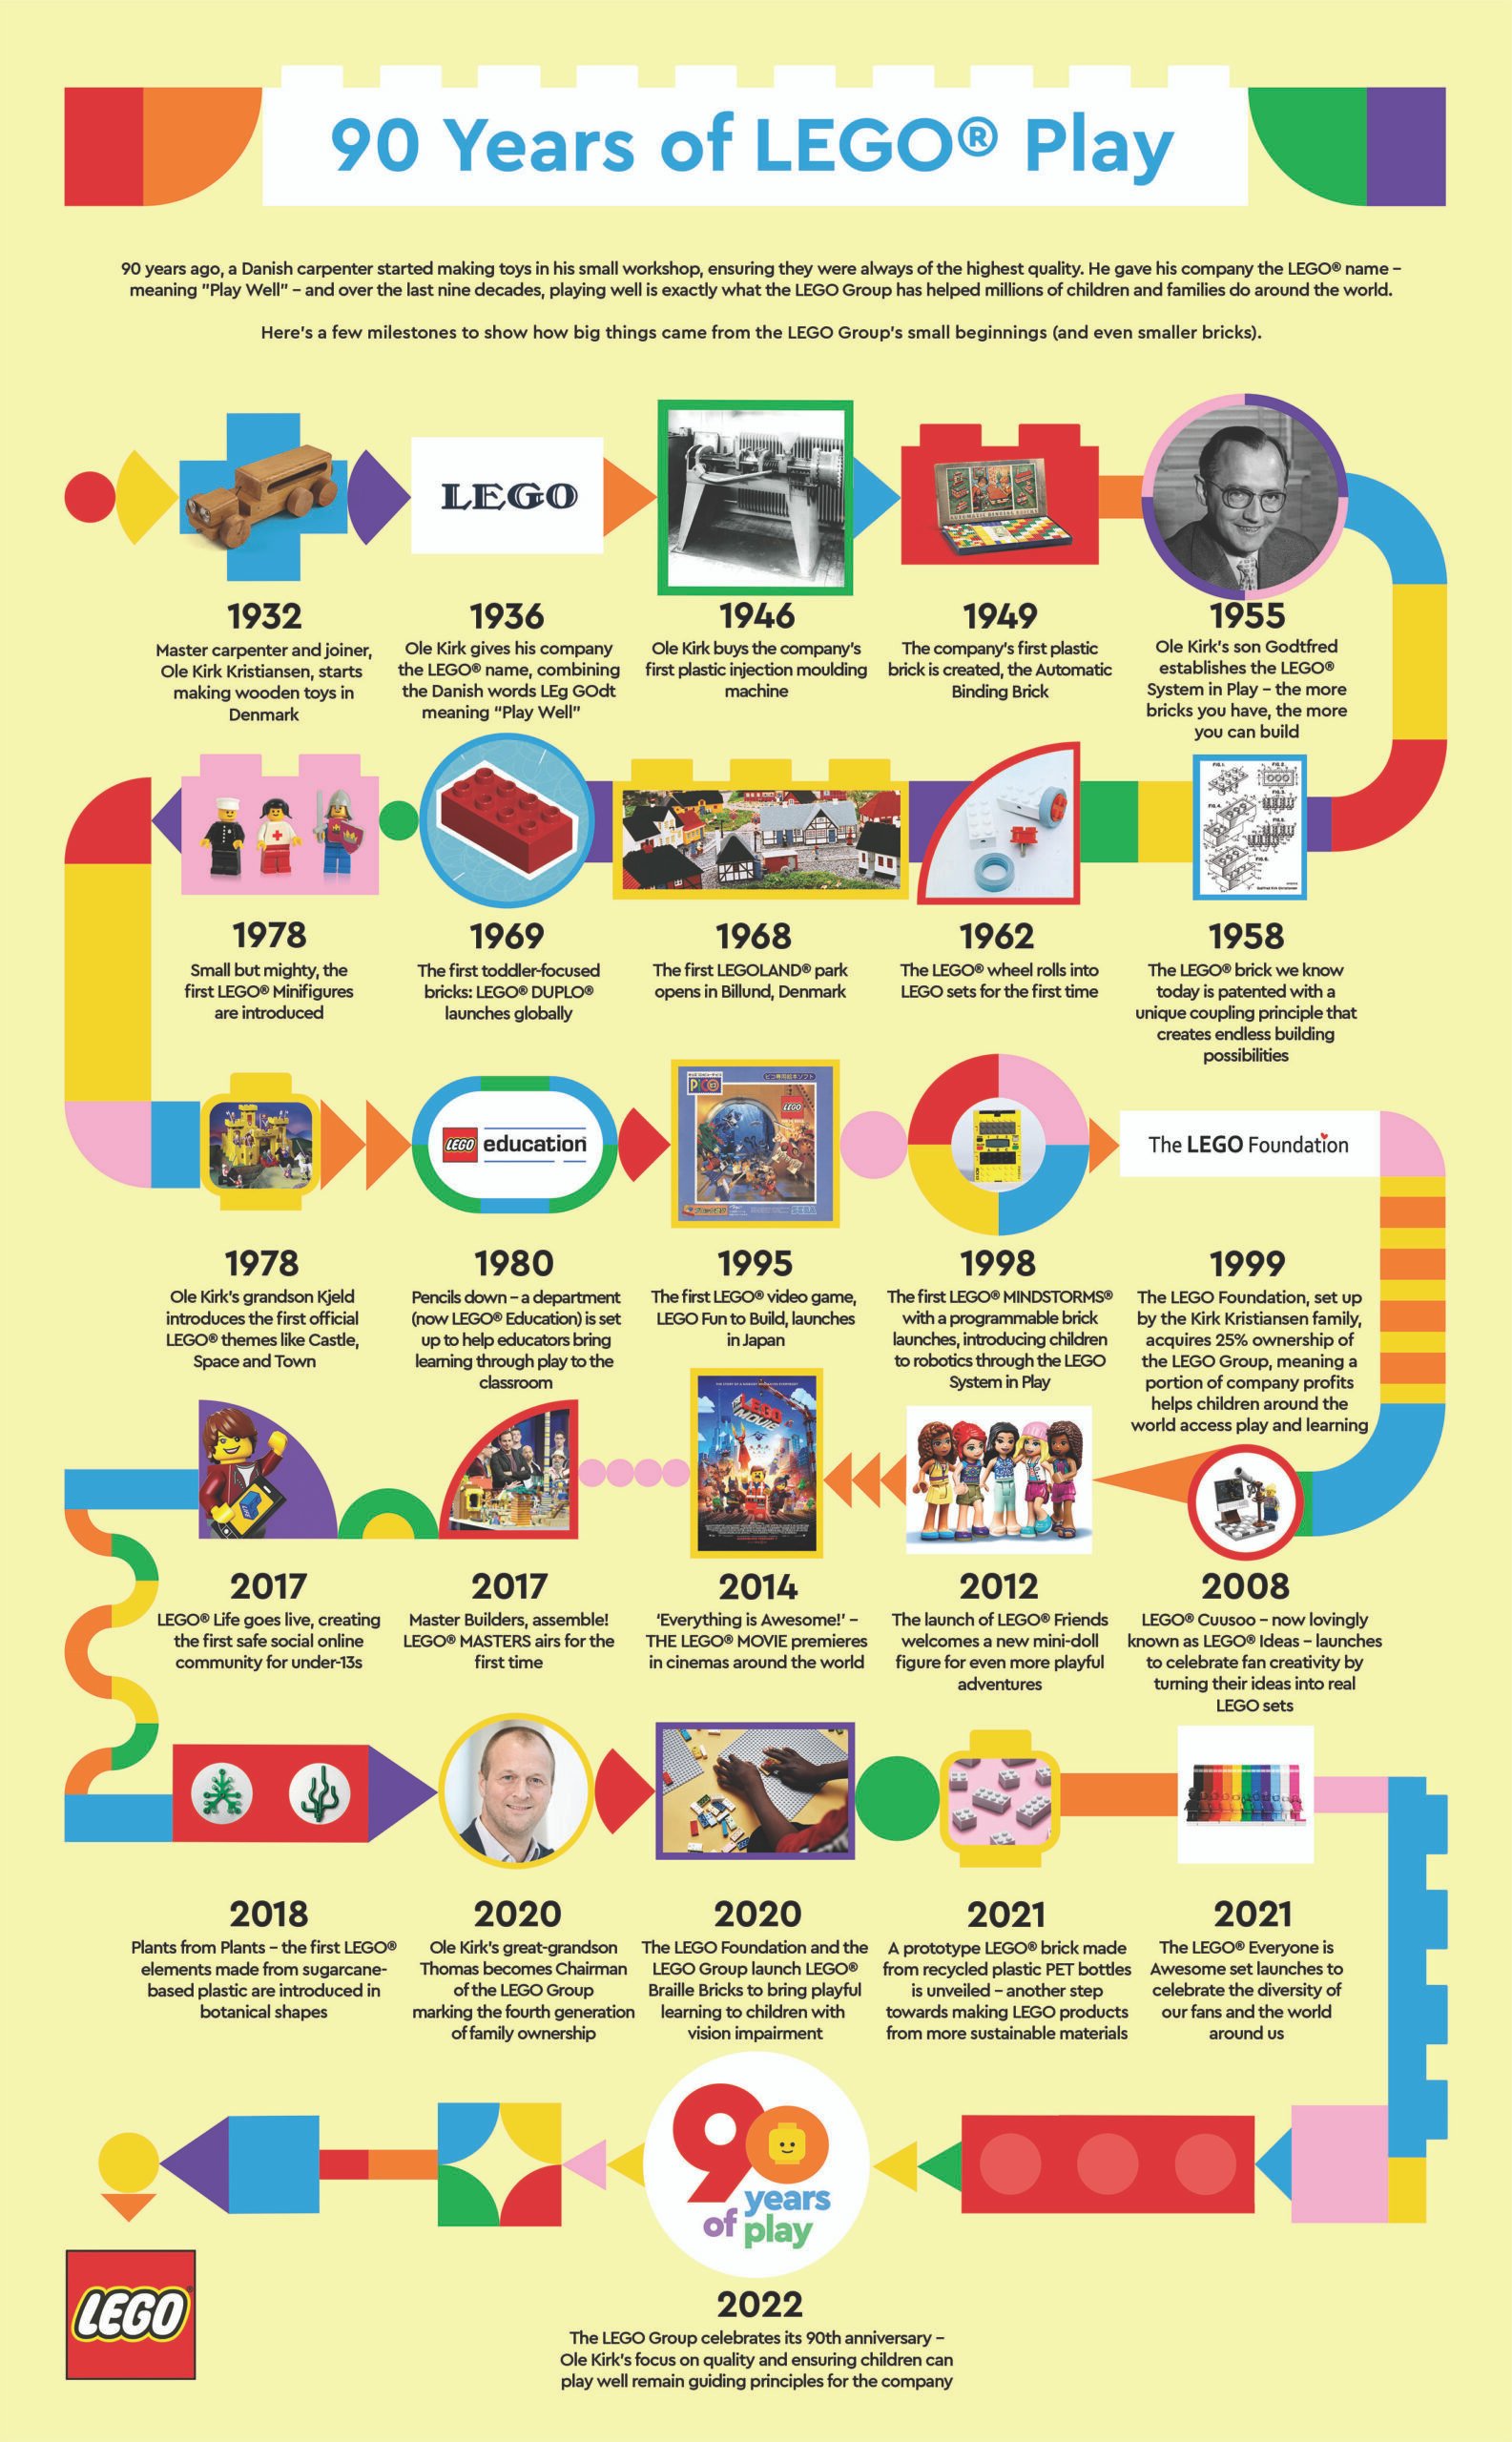 Lego 90 years of play